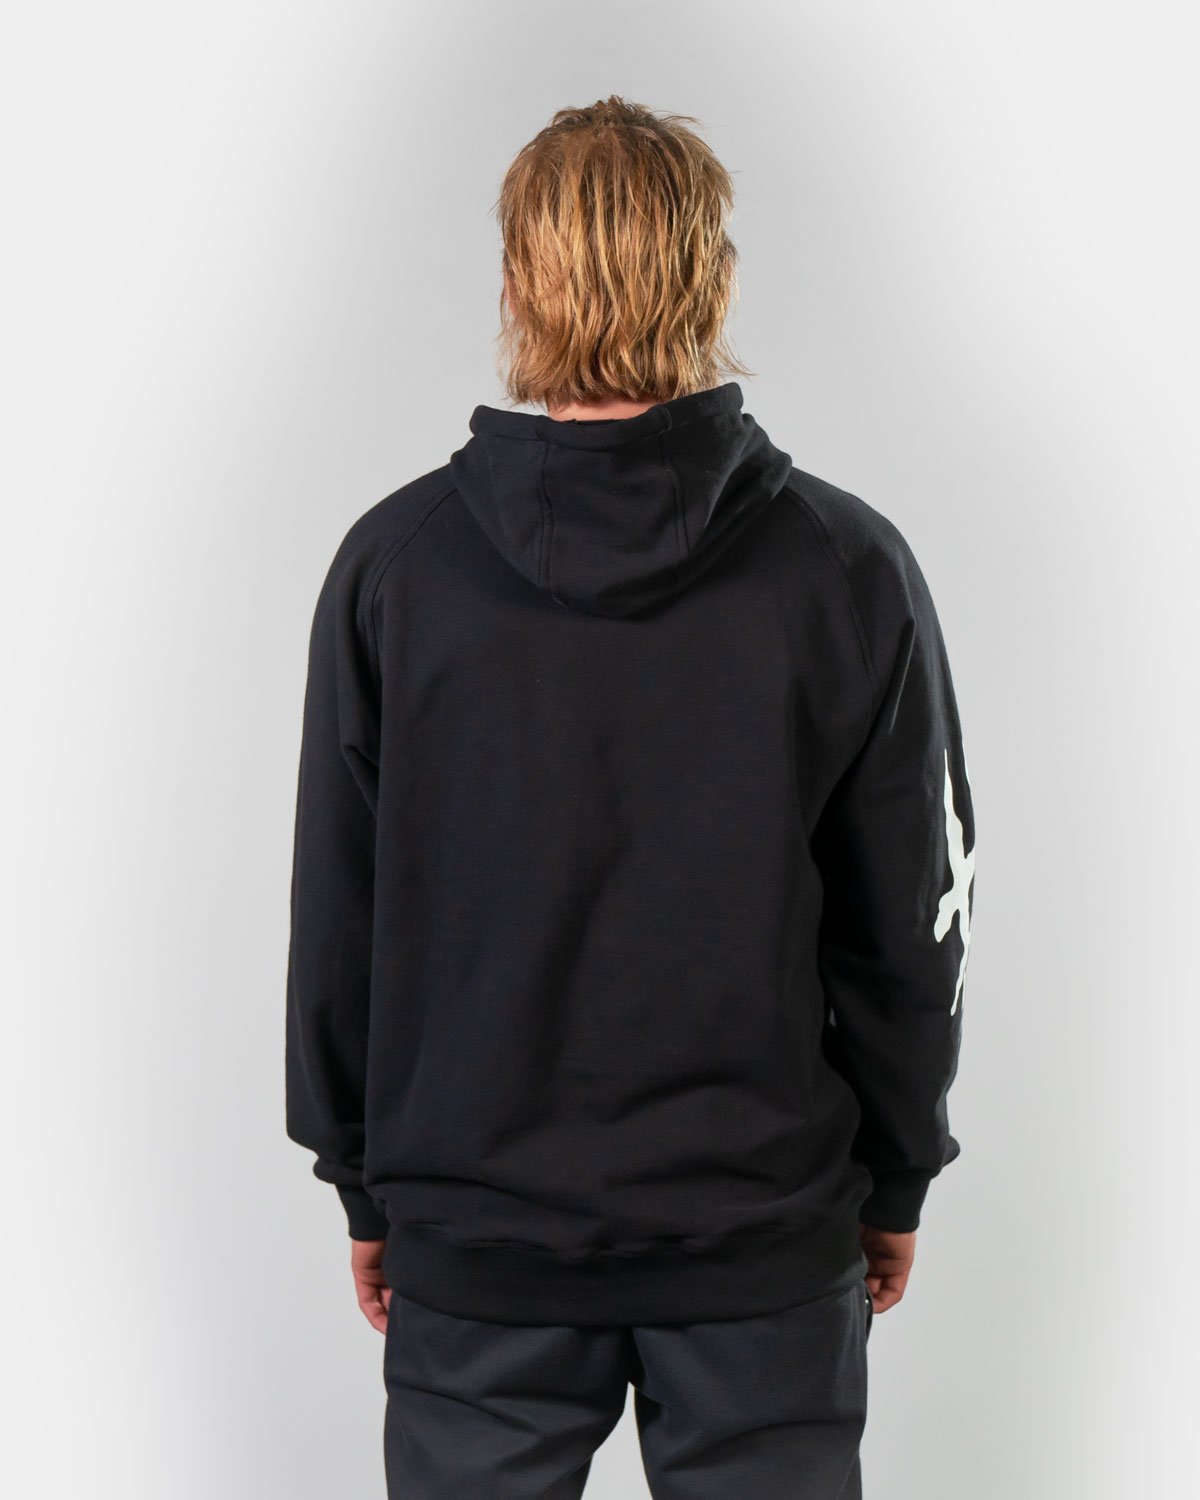 Lobstersnowboards Pullover hoodie product photo